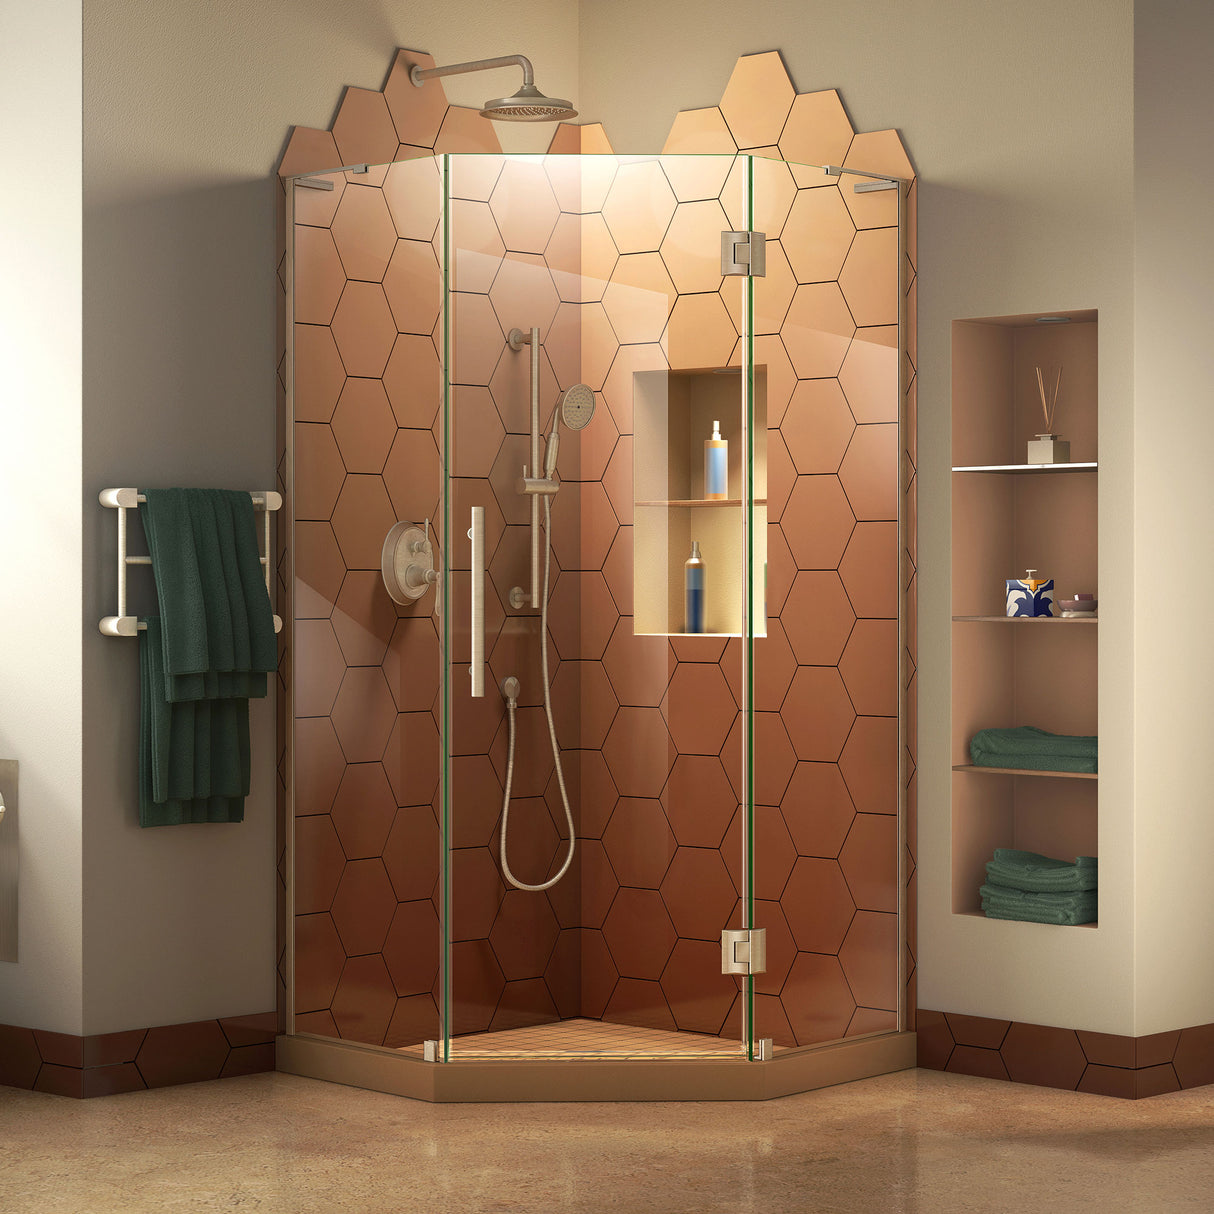 DreamLine Prism Plus 34 in. x 72 in. Frameless Neo-Angle Hinged Shower Enclosure in Brushed Nickel